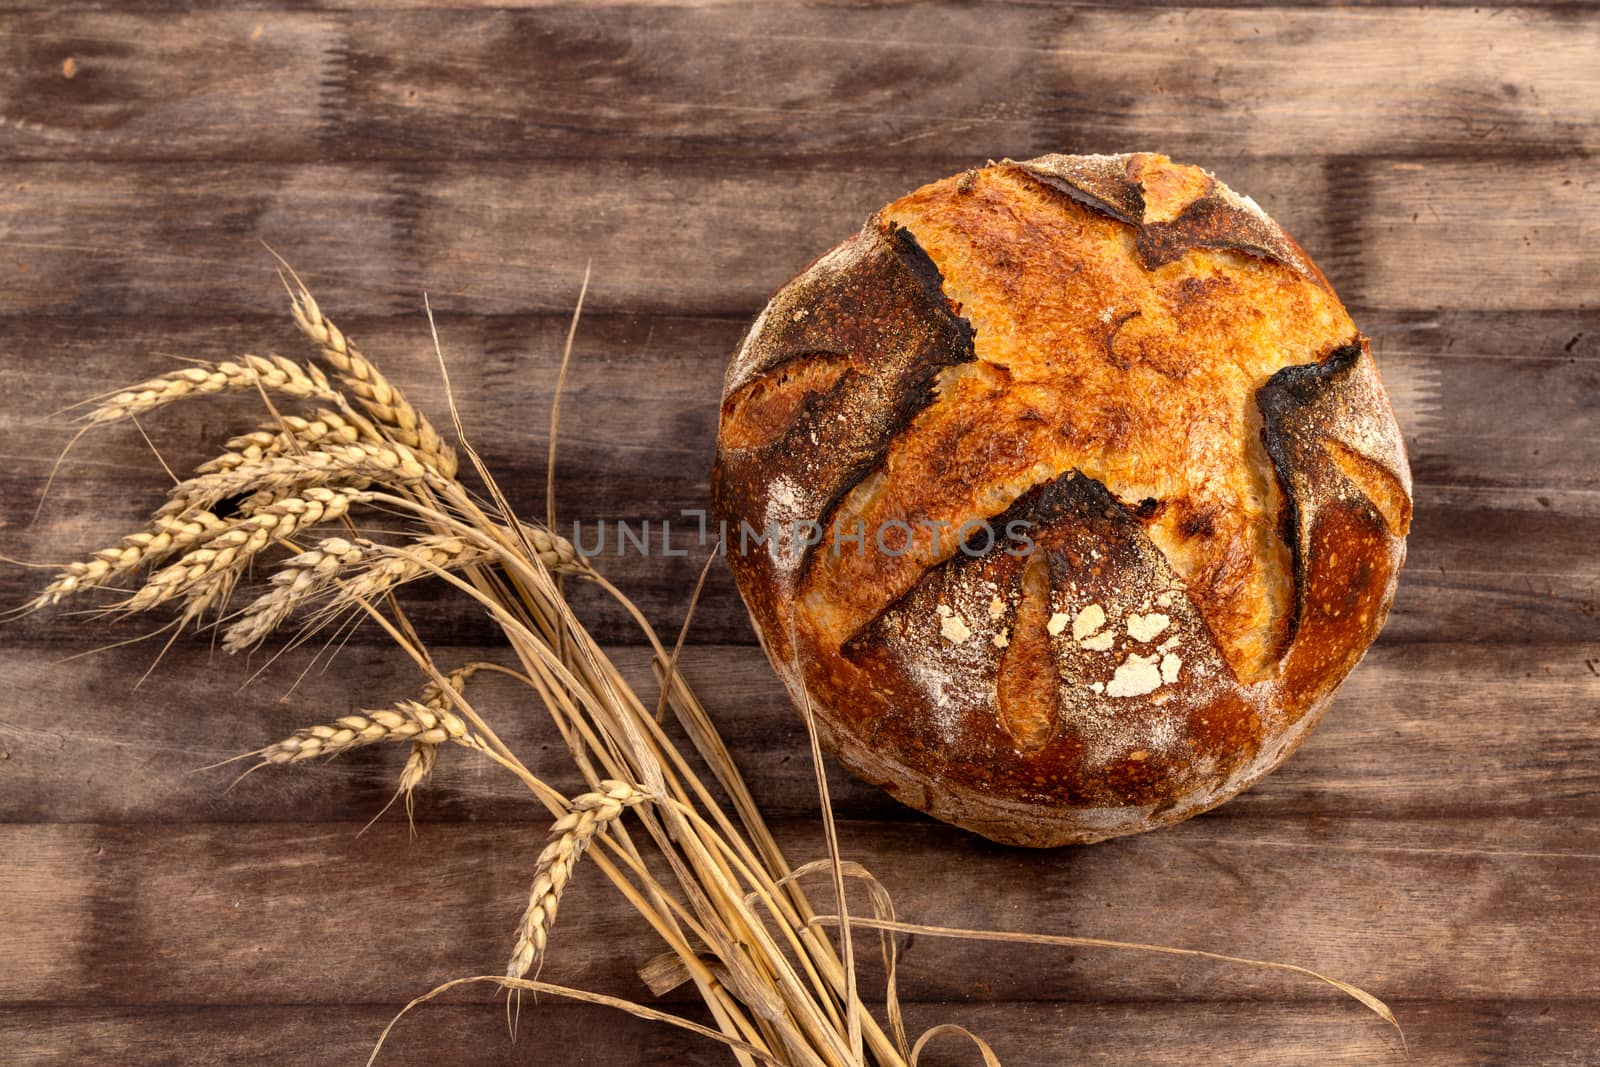 Freshly baked artisan sourdough bread loaf with wheat grains on a wooden board.